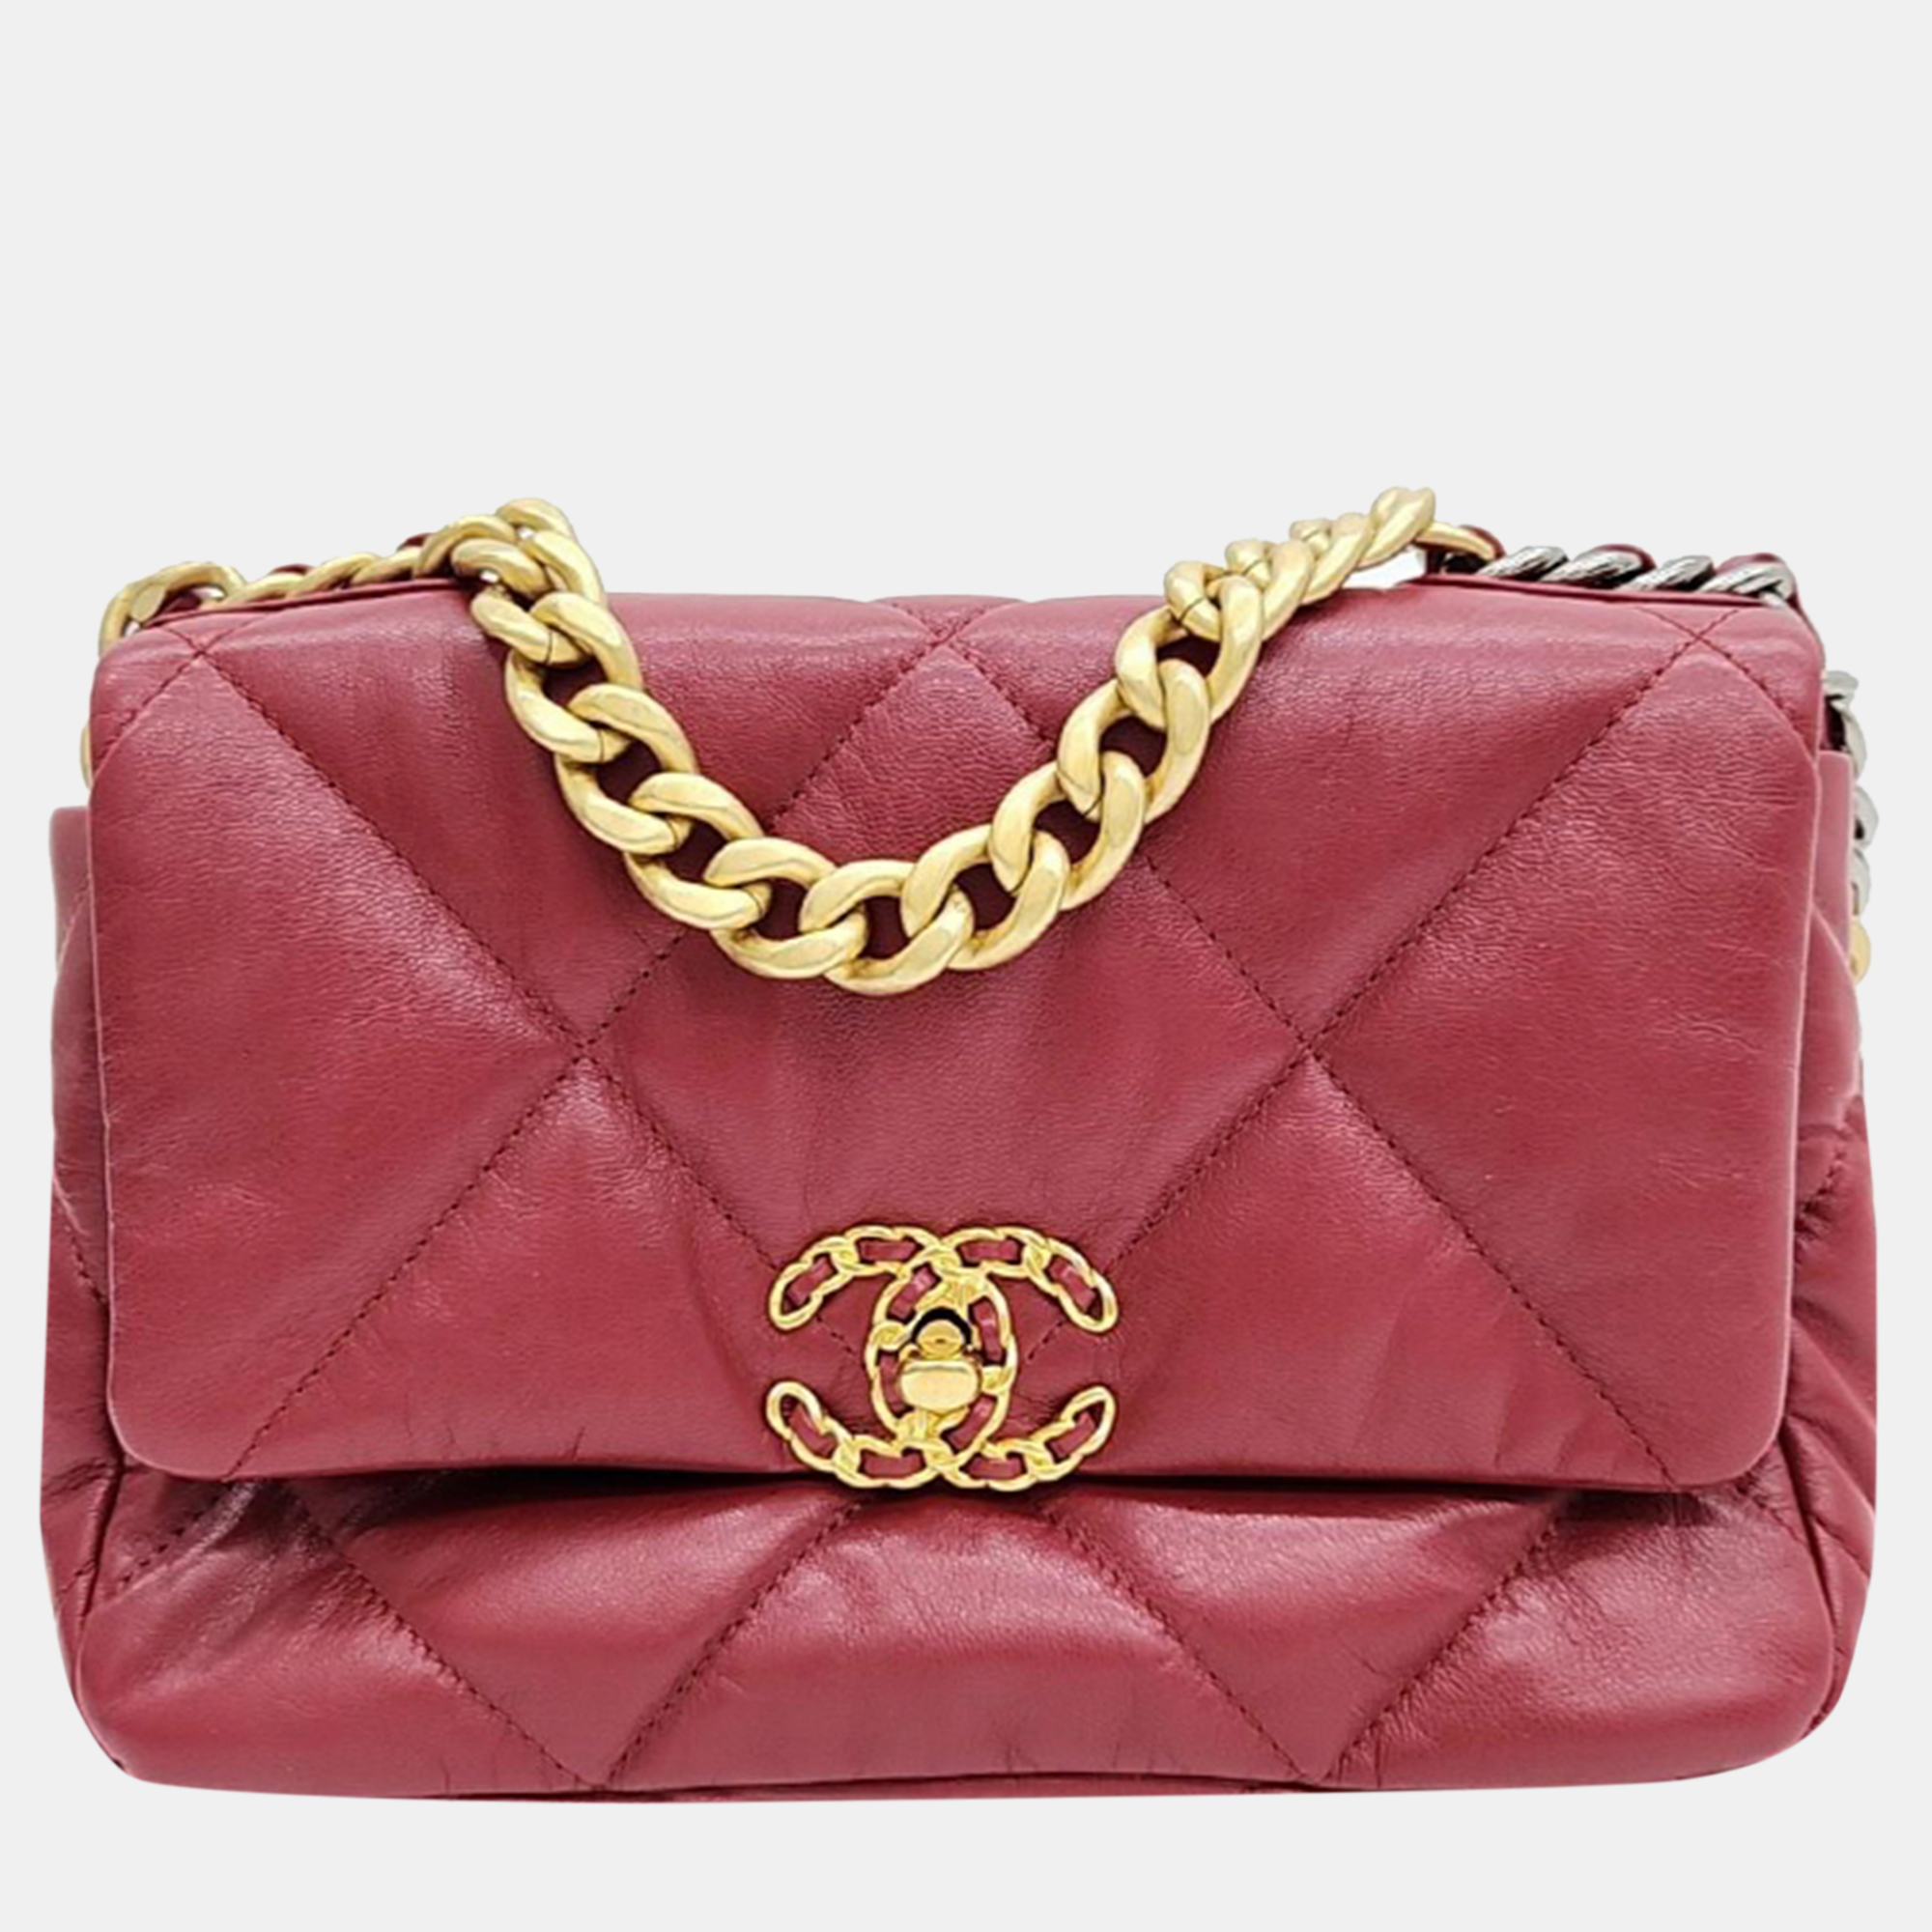 Chanel red leather 19 small flap bag